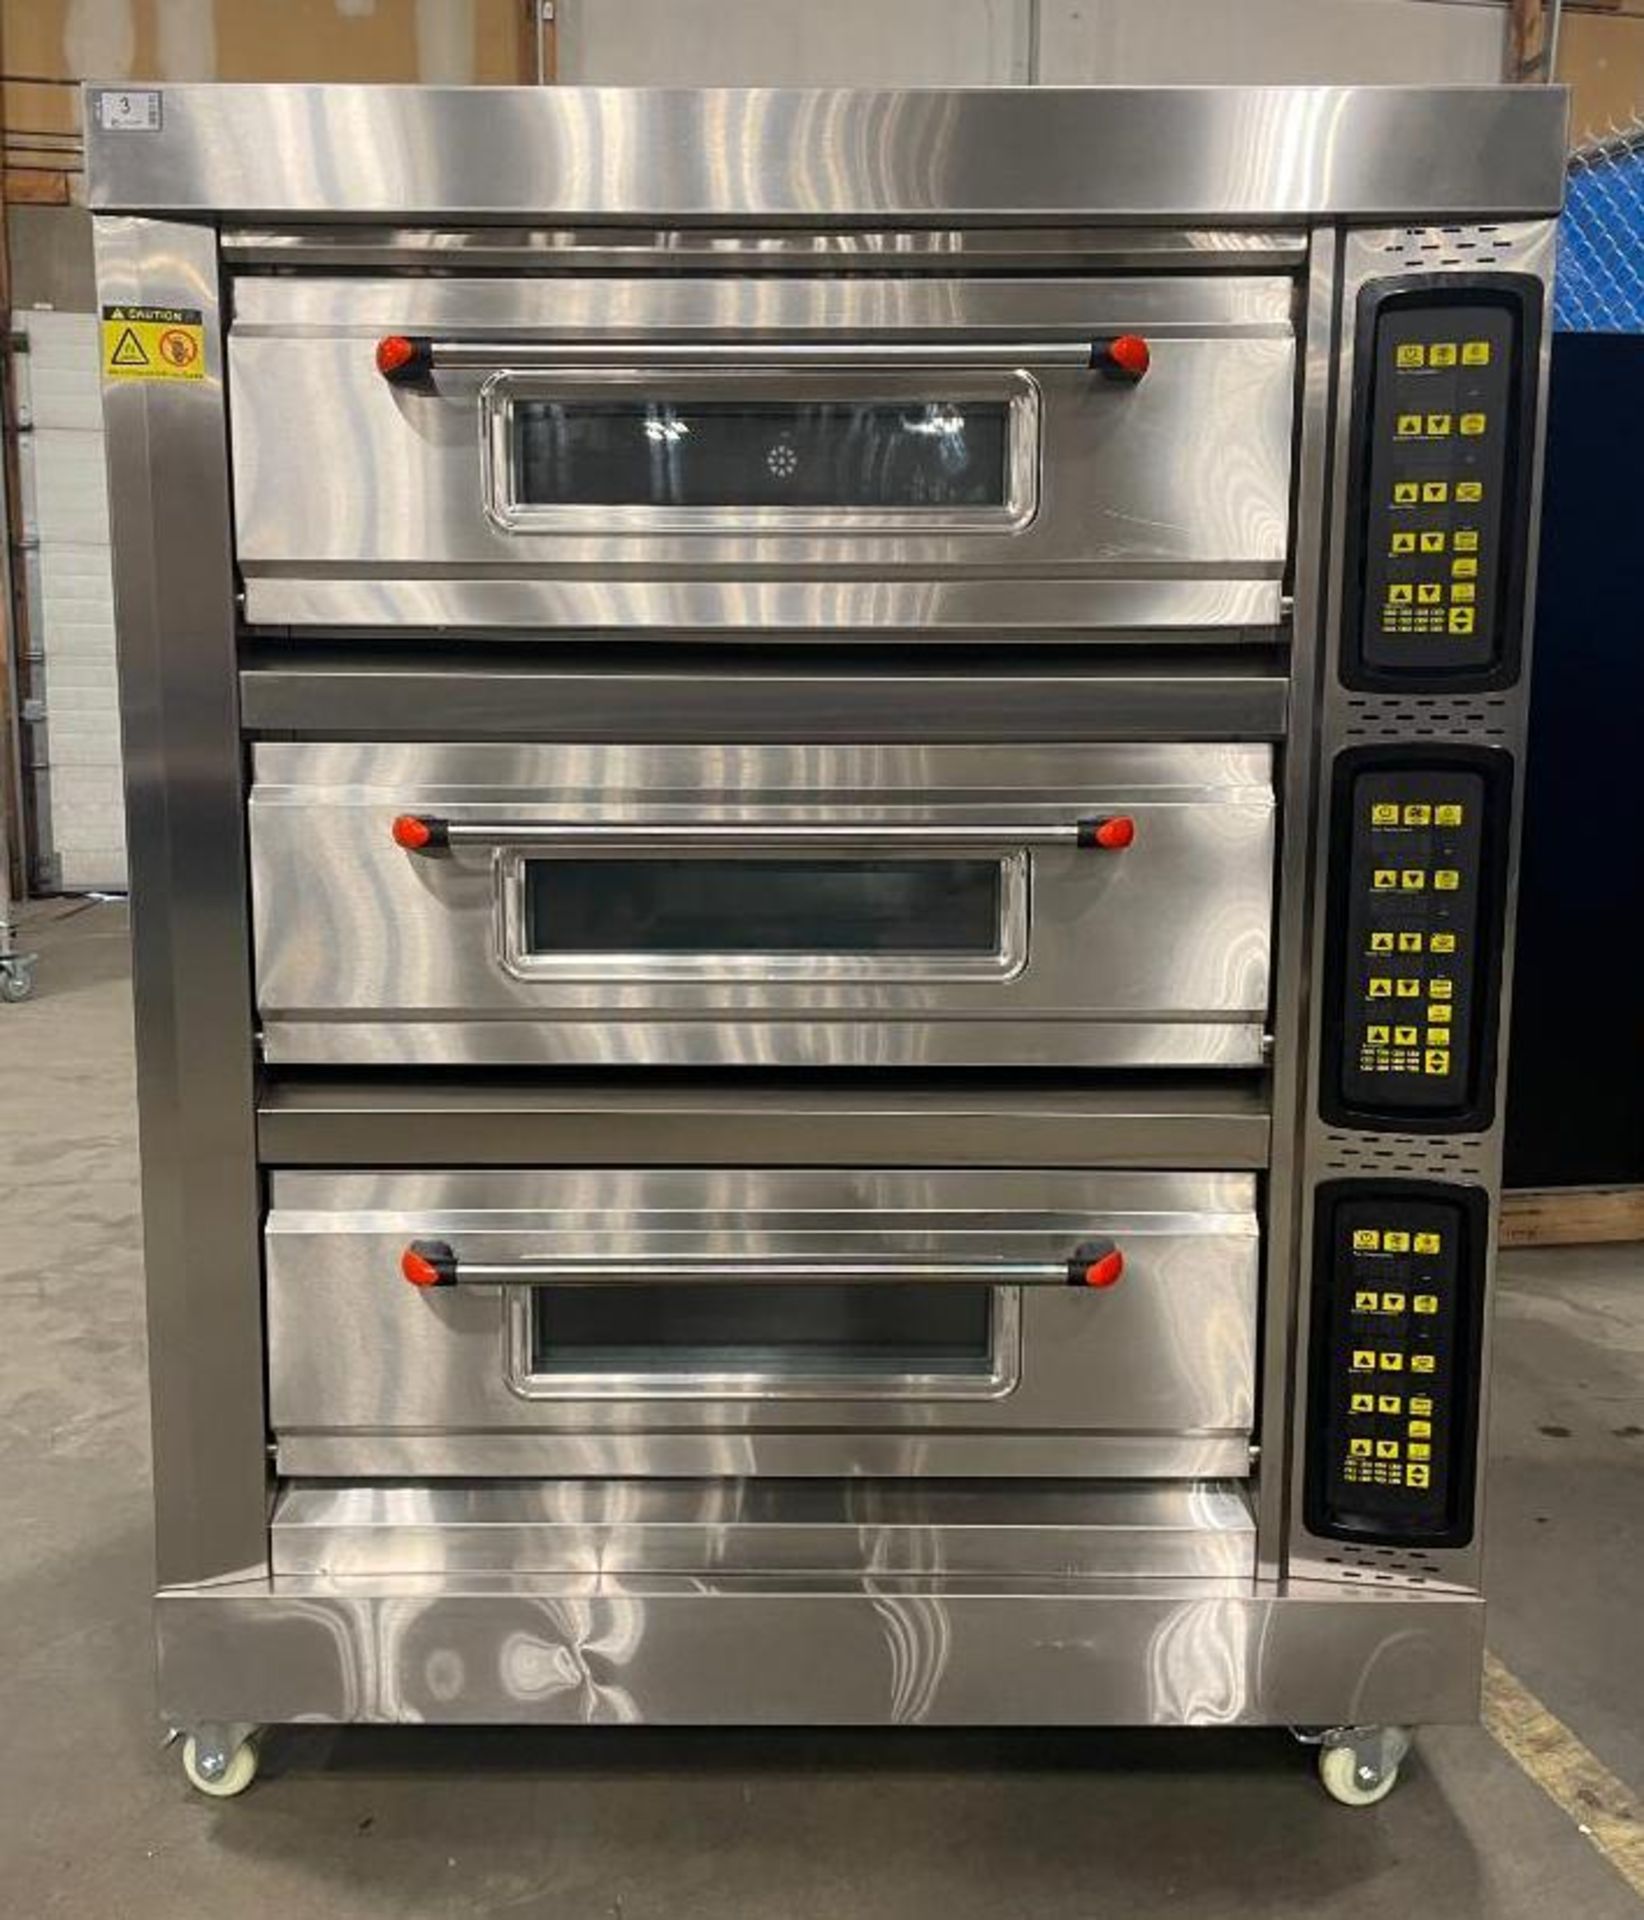 NEW HGB-306 TRIPLE DECK ELECTRIC OVEN - Image 13 of 13